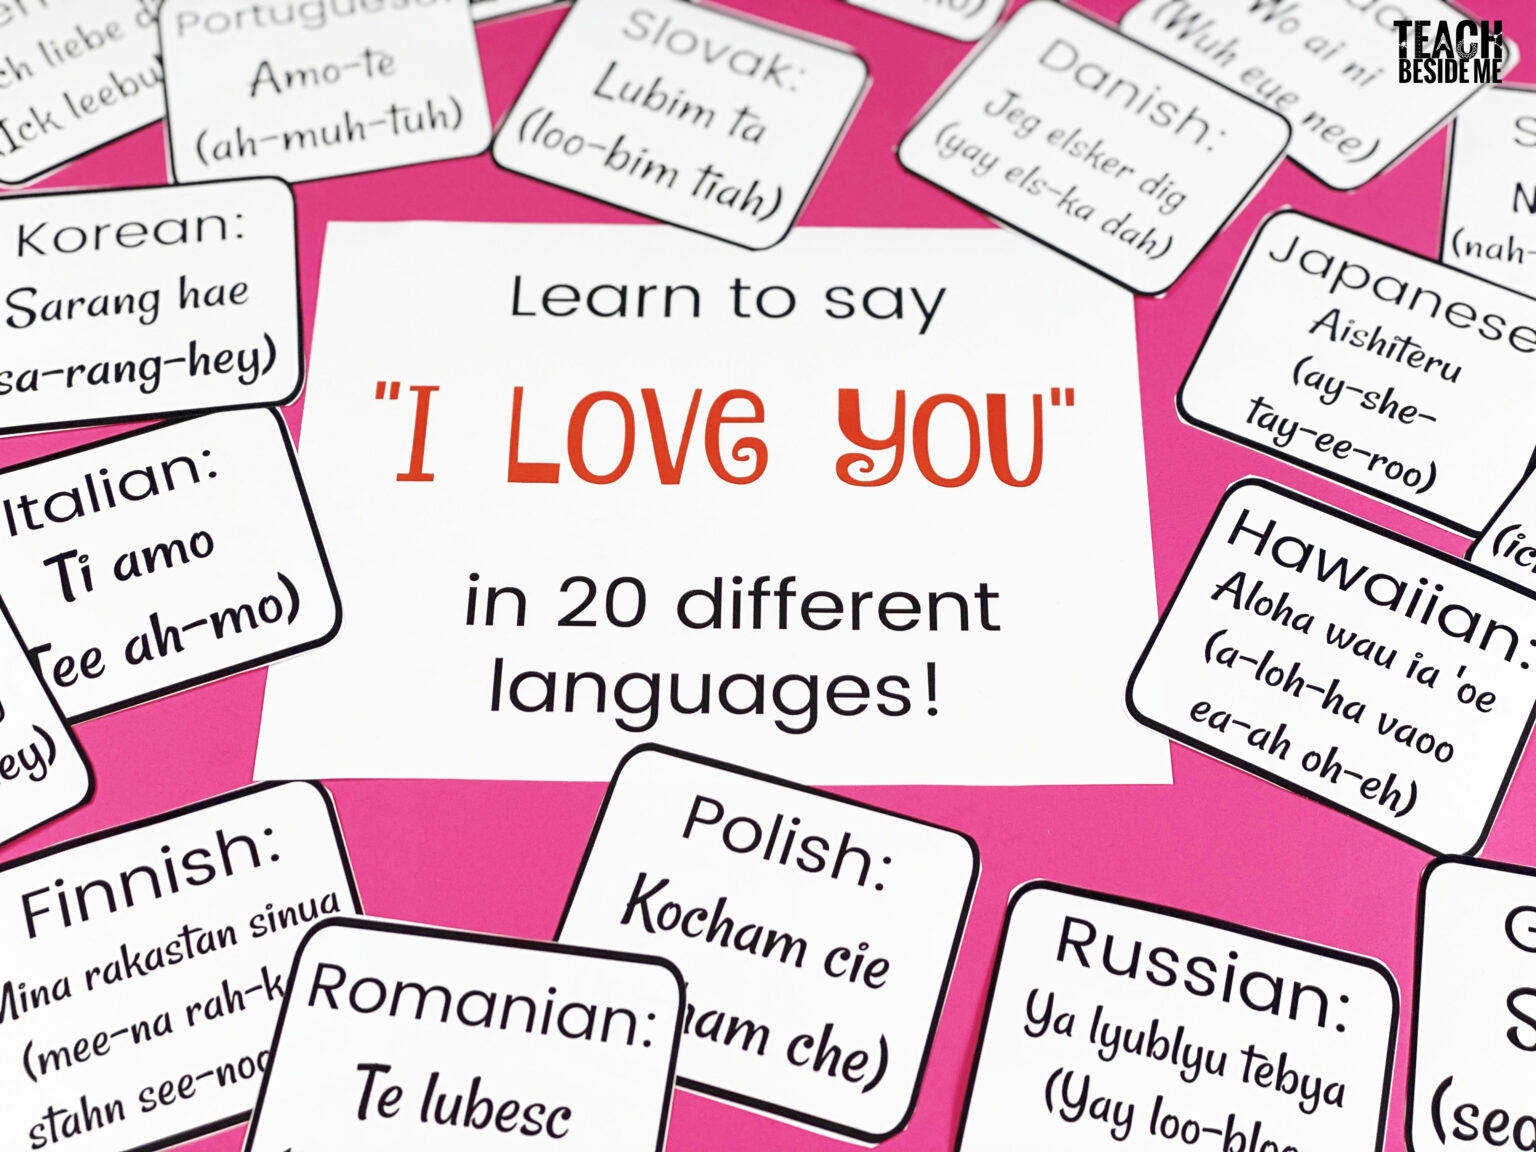 How to Say “I Love You” in 15 Different Languages